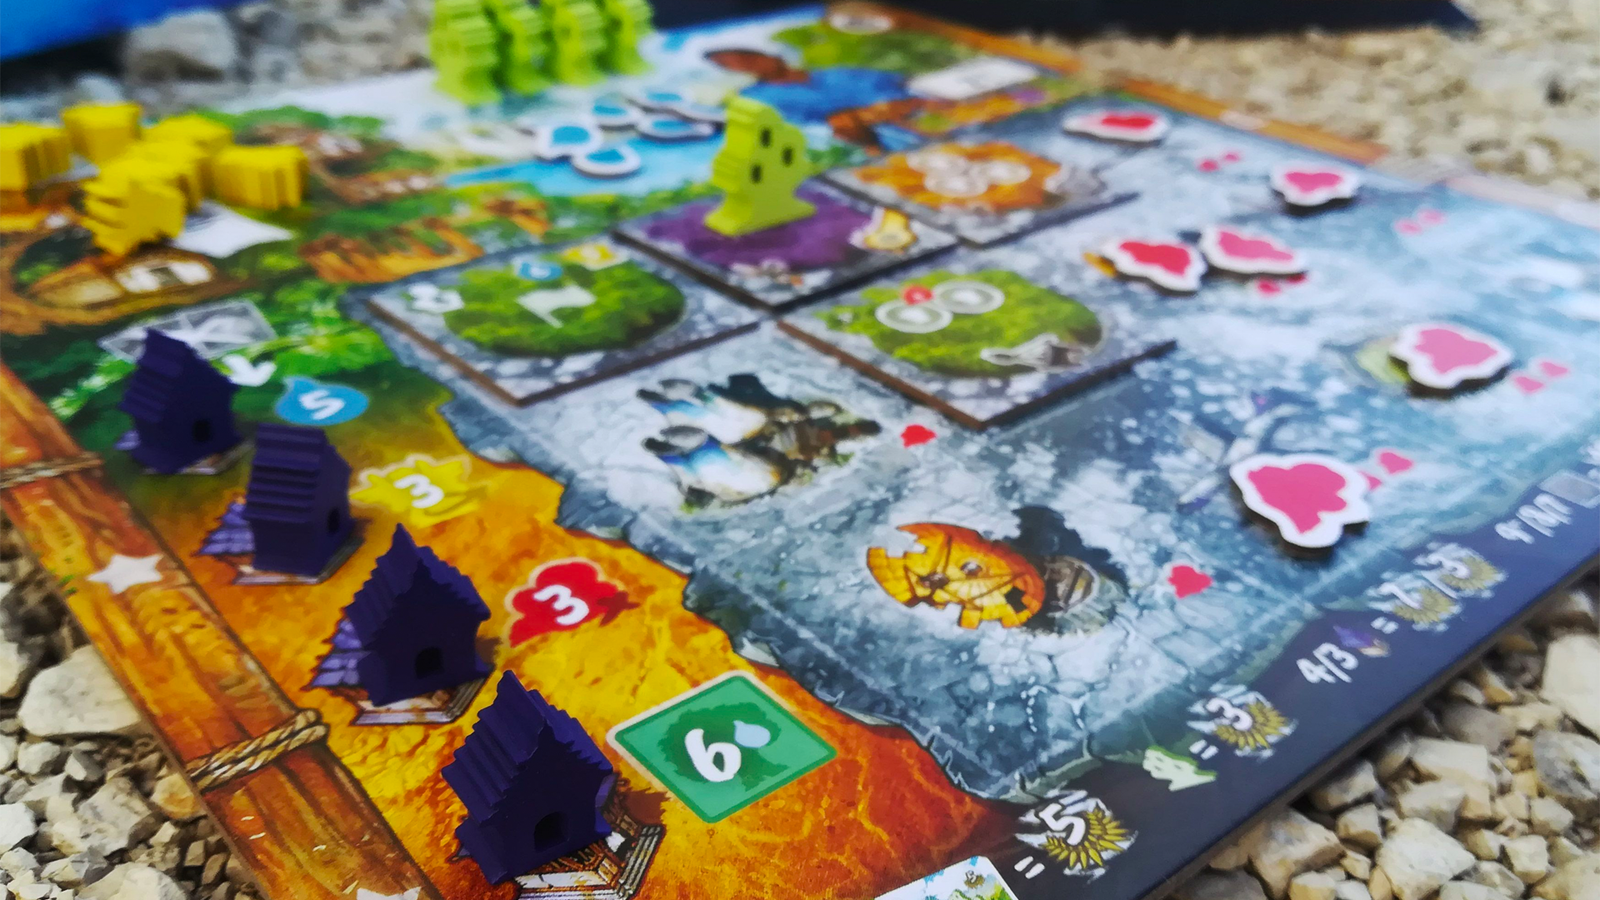 9 Hacks To Learn From The Most Successful Board Games on Kickstarter